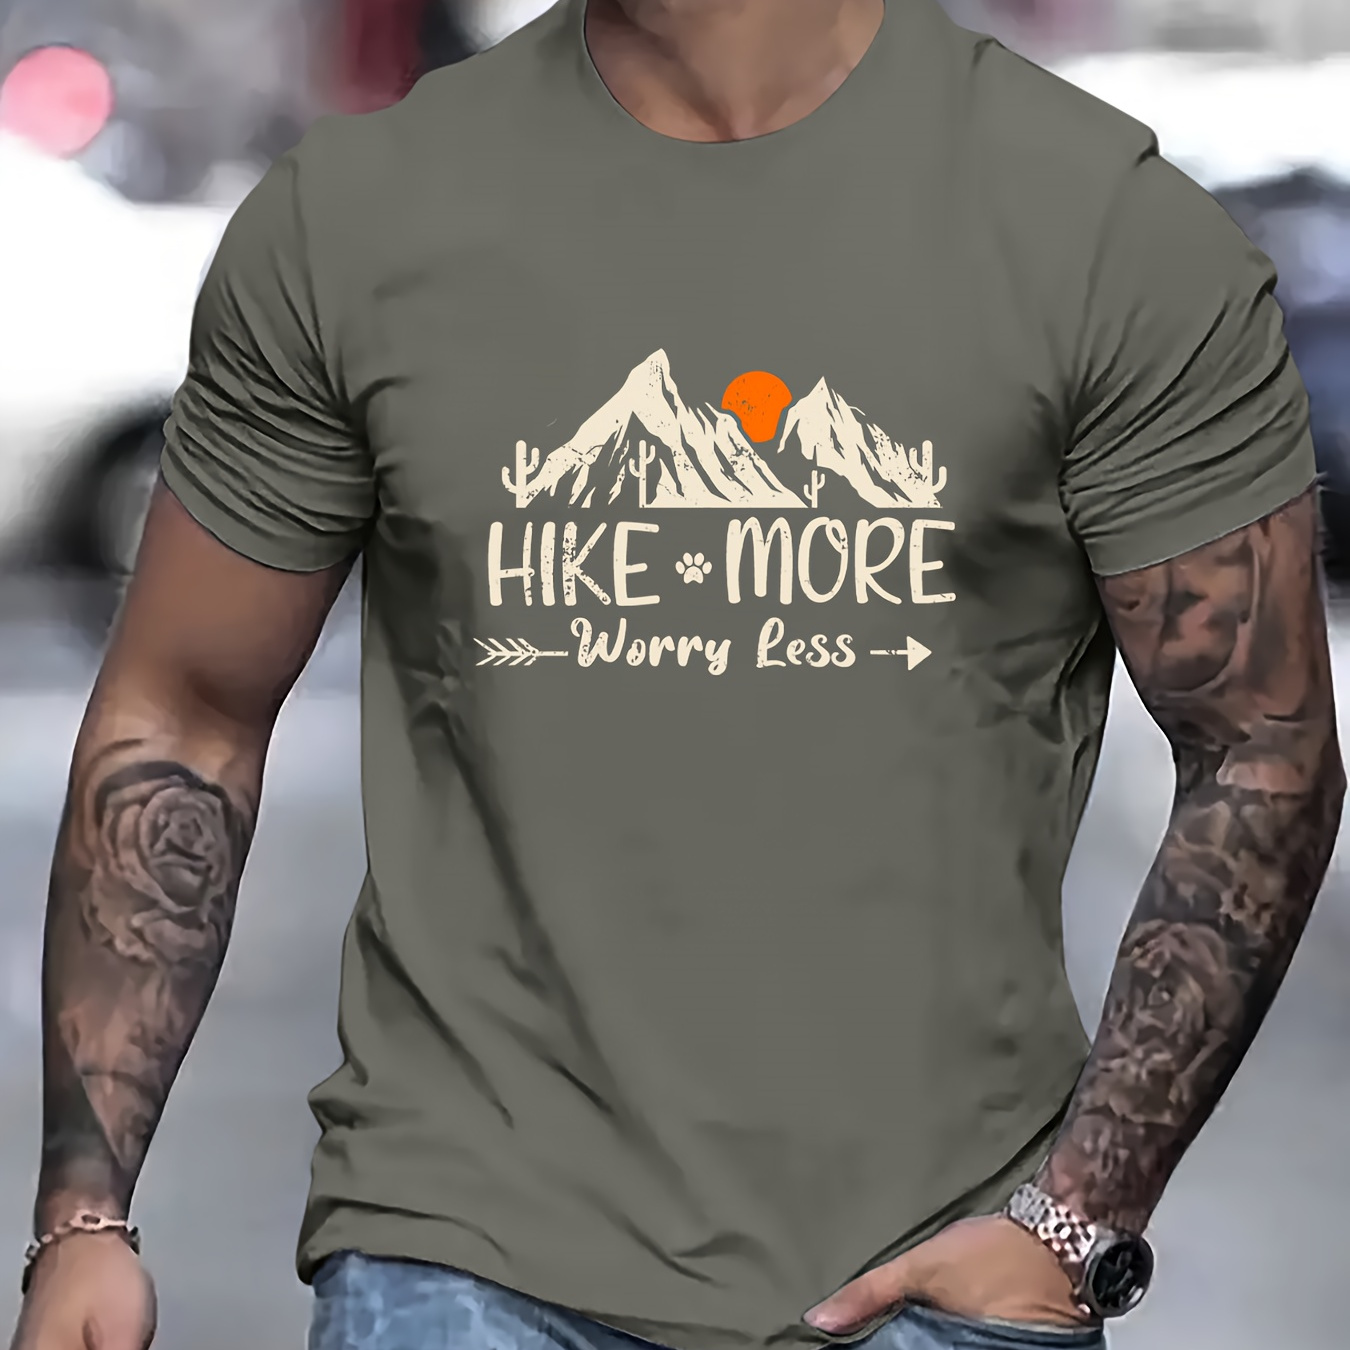 

Hike More Worry Less Print T Shirt, Tees For Men, Casual Short Sleeve T-shirt For Summer